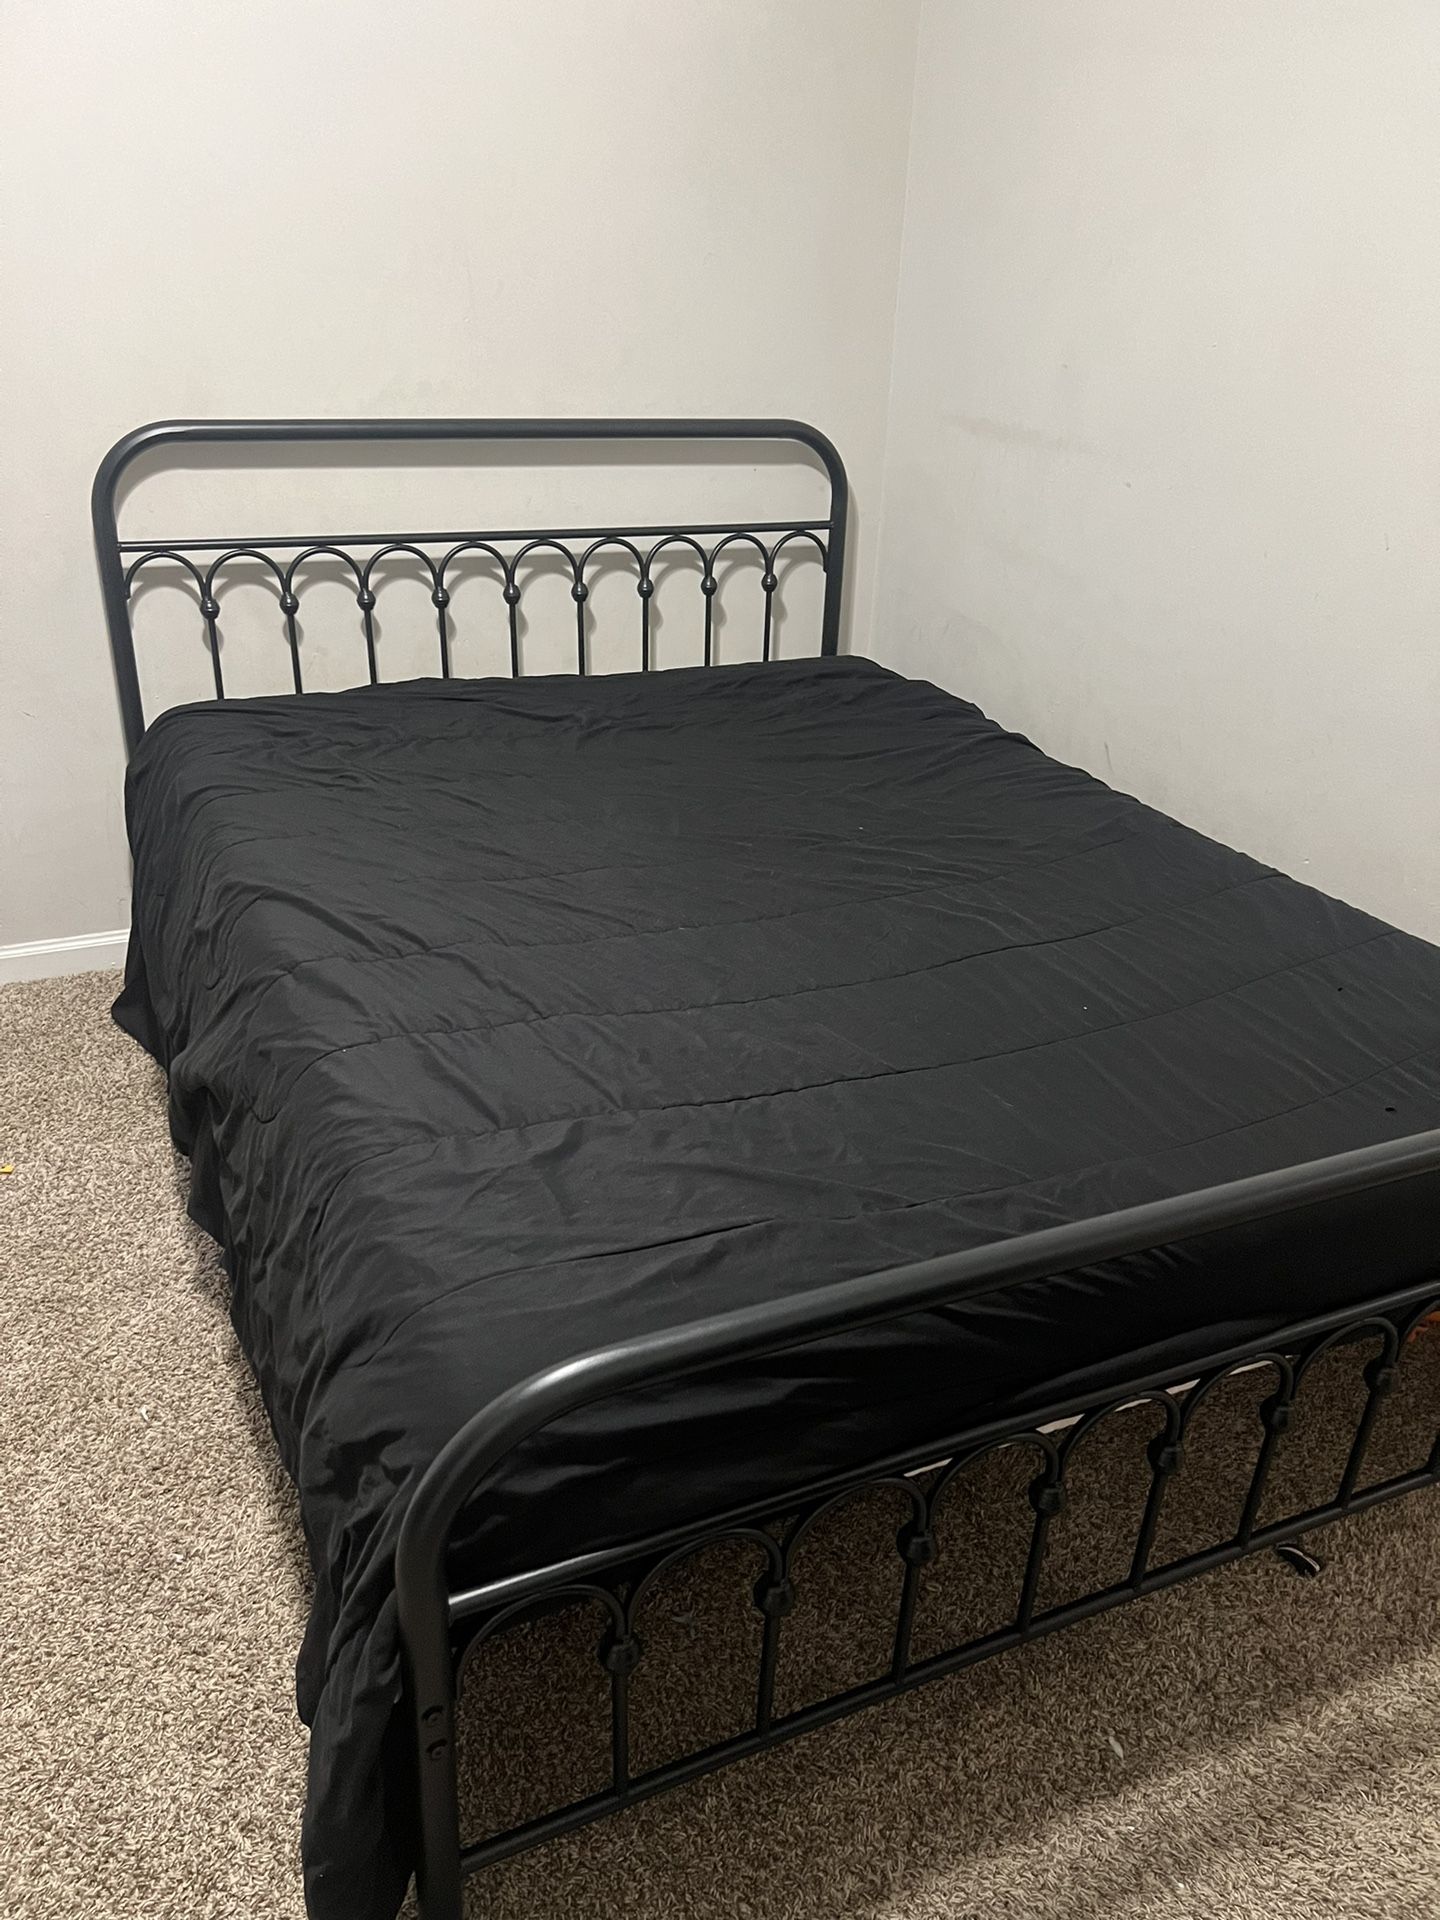 Queen Size Bed Frame and Mattress 